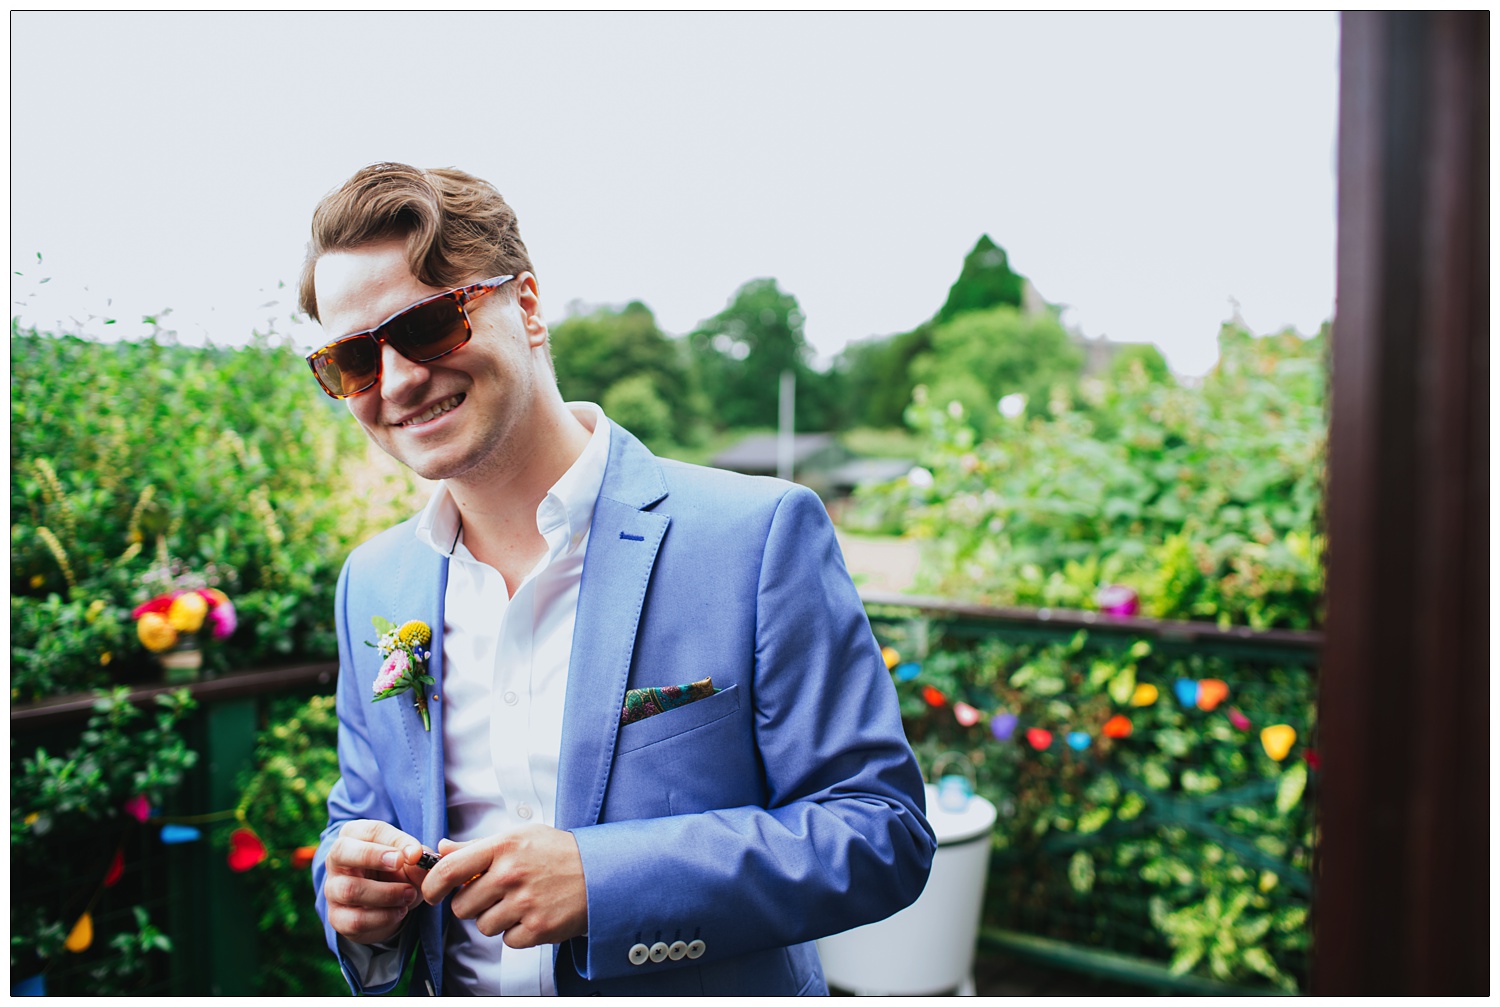 The groom in his pale blue suit and sunglasses just before his wedding. There is heart bunting on the fence.